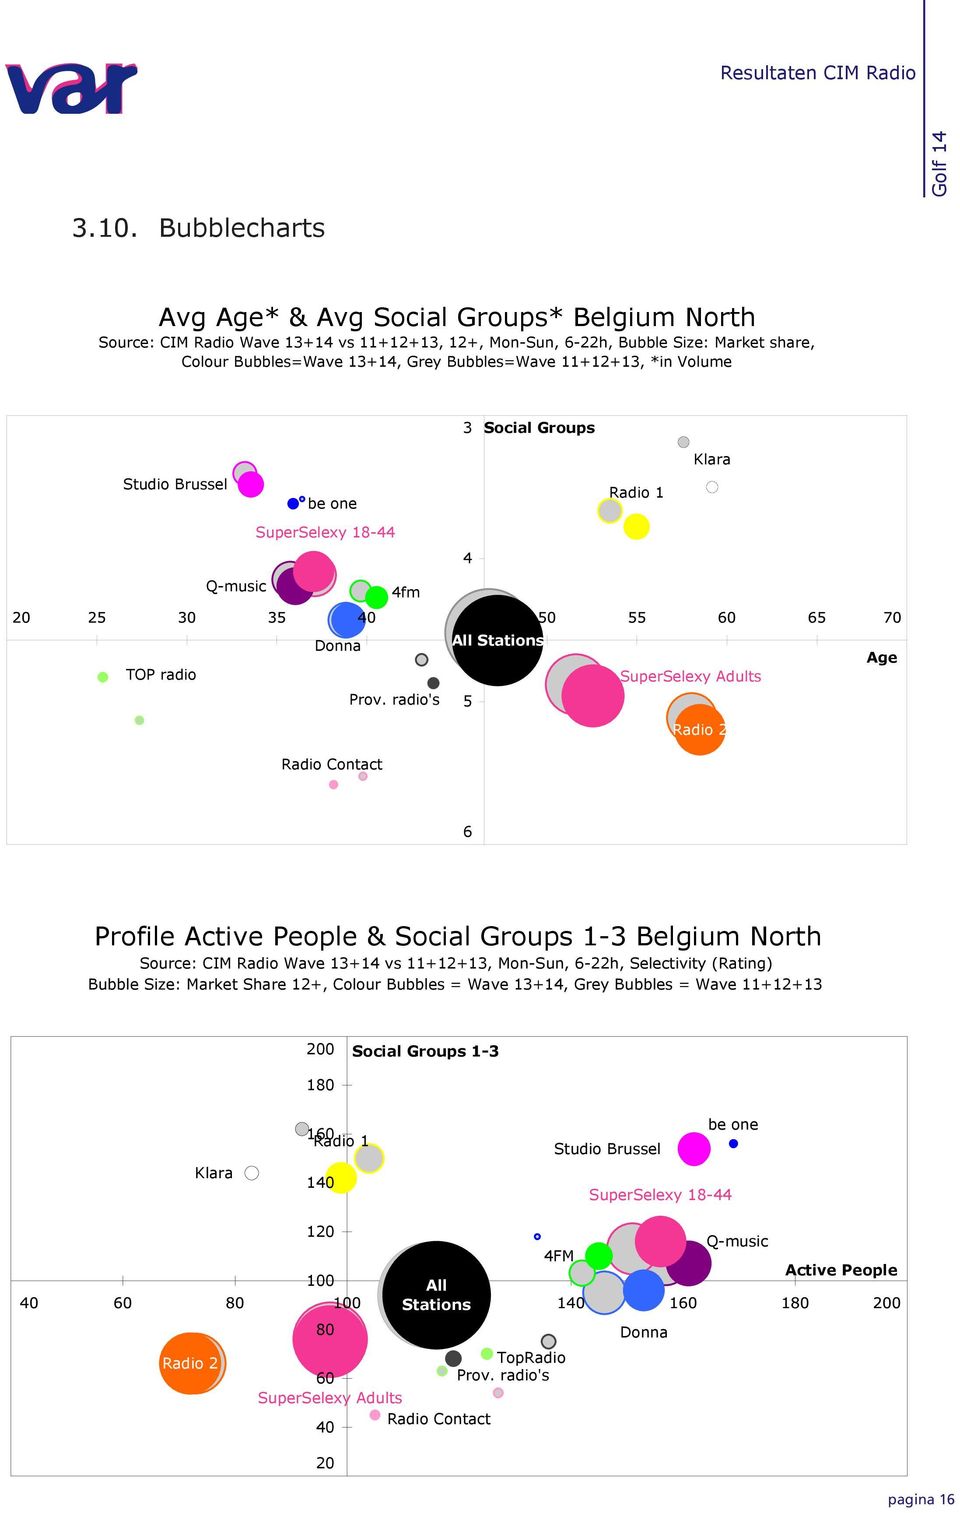 radio's All Stations SuperSelexy Adults Age Radio Radio Contact Profile Active People & Social Groups - Belgium North Source: CIM Radio Wave + vs ++, Mon-Sun, -h, Selectivity